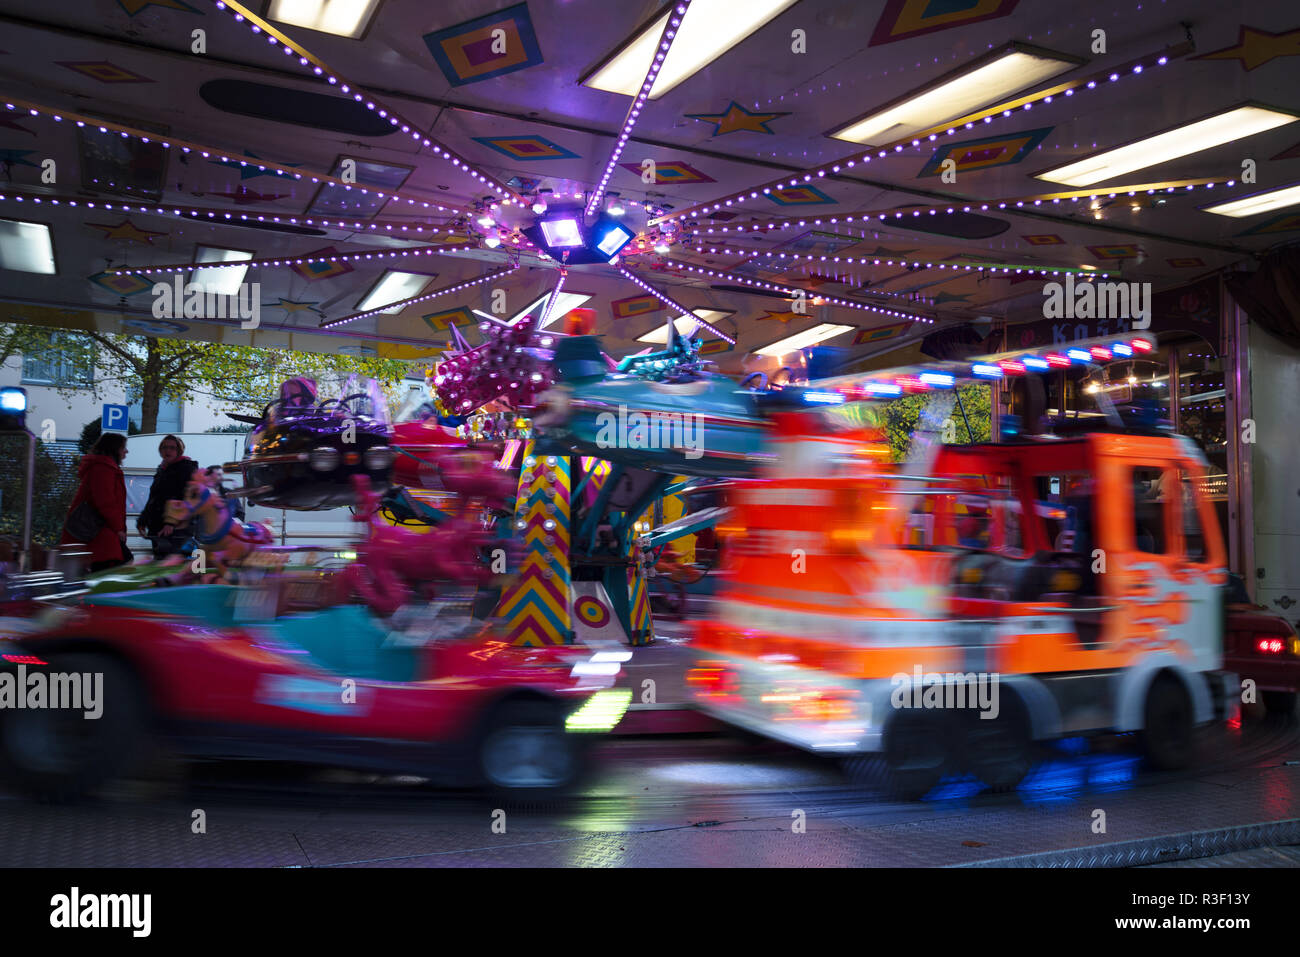 children's carousel with fire truck and cars at the christmas funfair market, long time exposure with blurred motion, abstract background, copy space Stock Photo